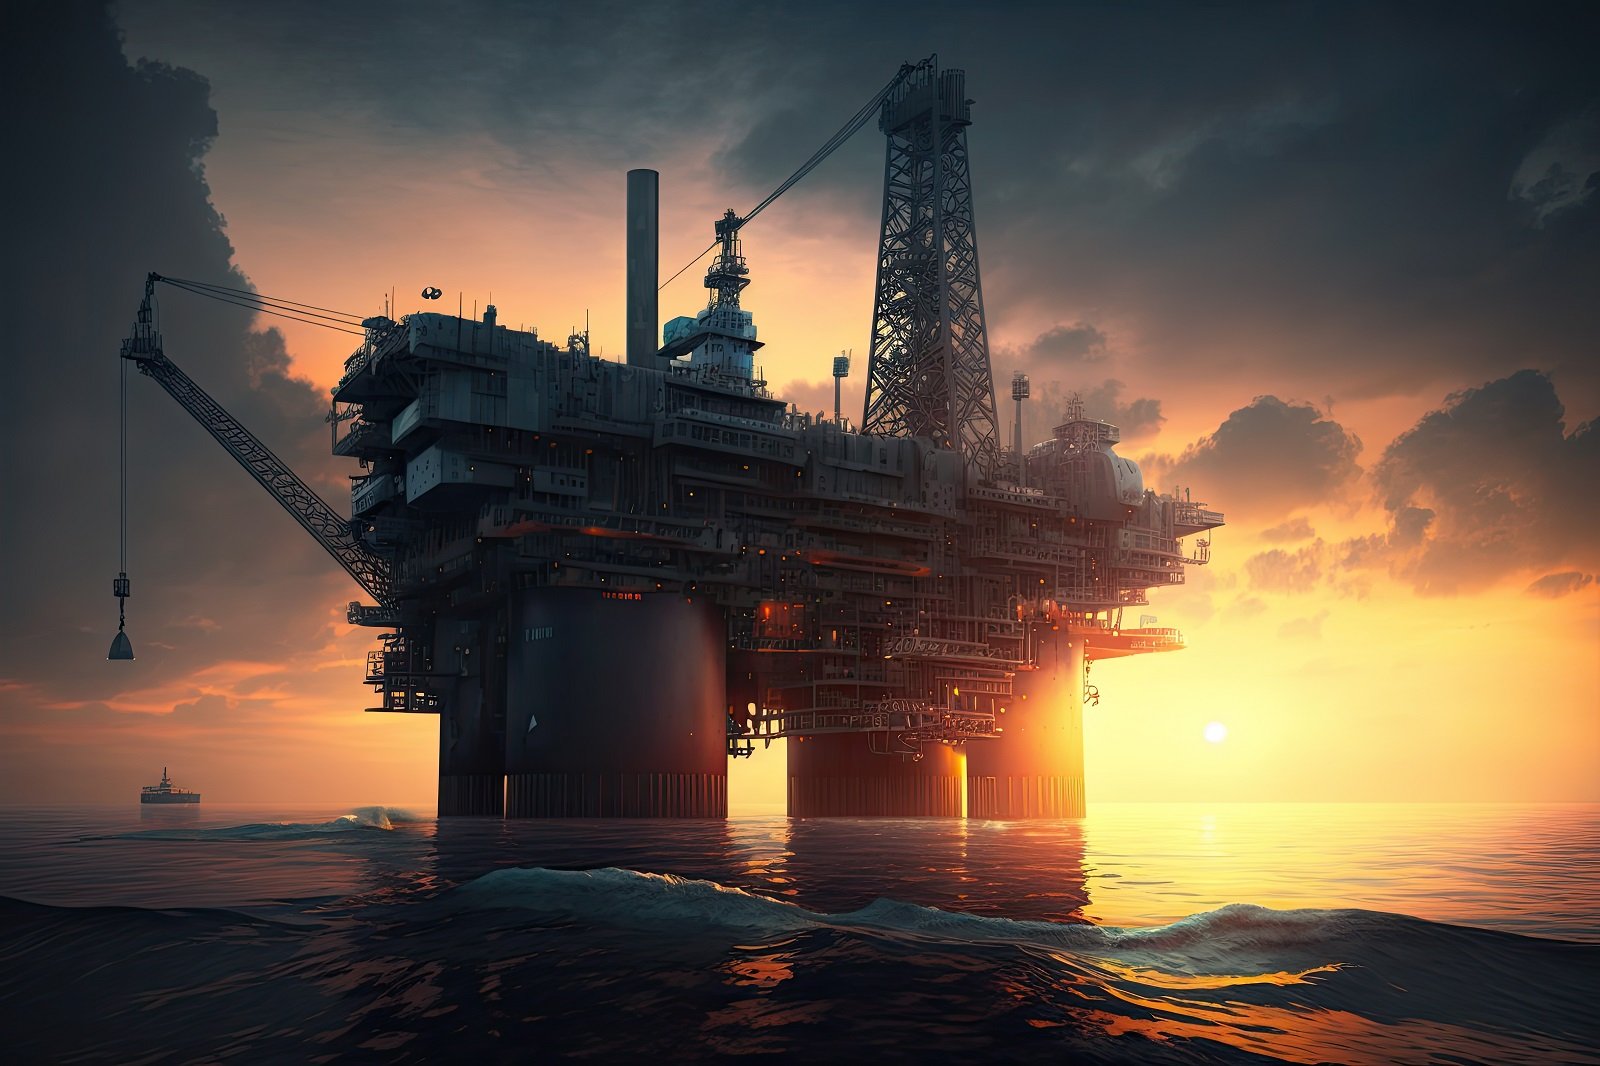 oil-platform-in-the-ocean-with-the-sun-setting-behind-it